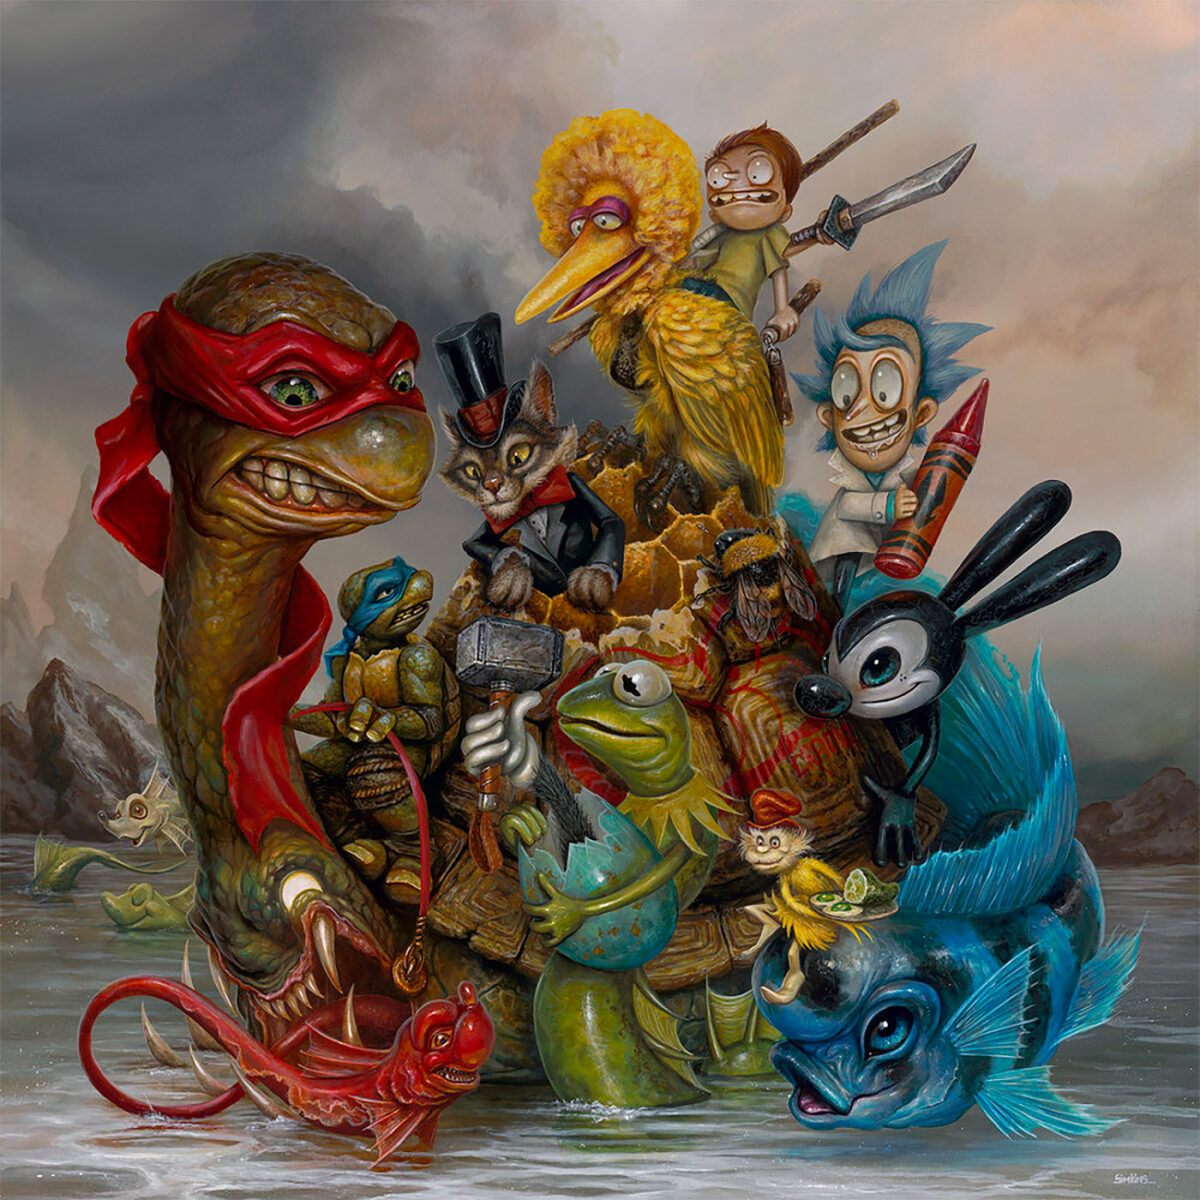 Surreal And Allegorical Acrylic Paintings By Greg Simkins 14